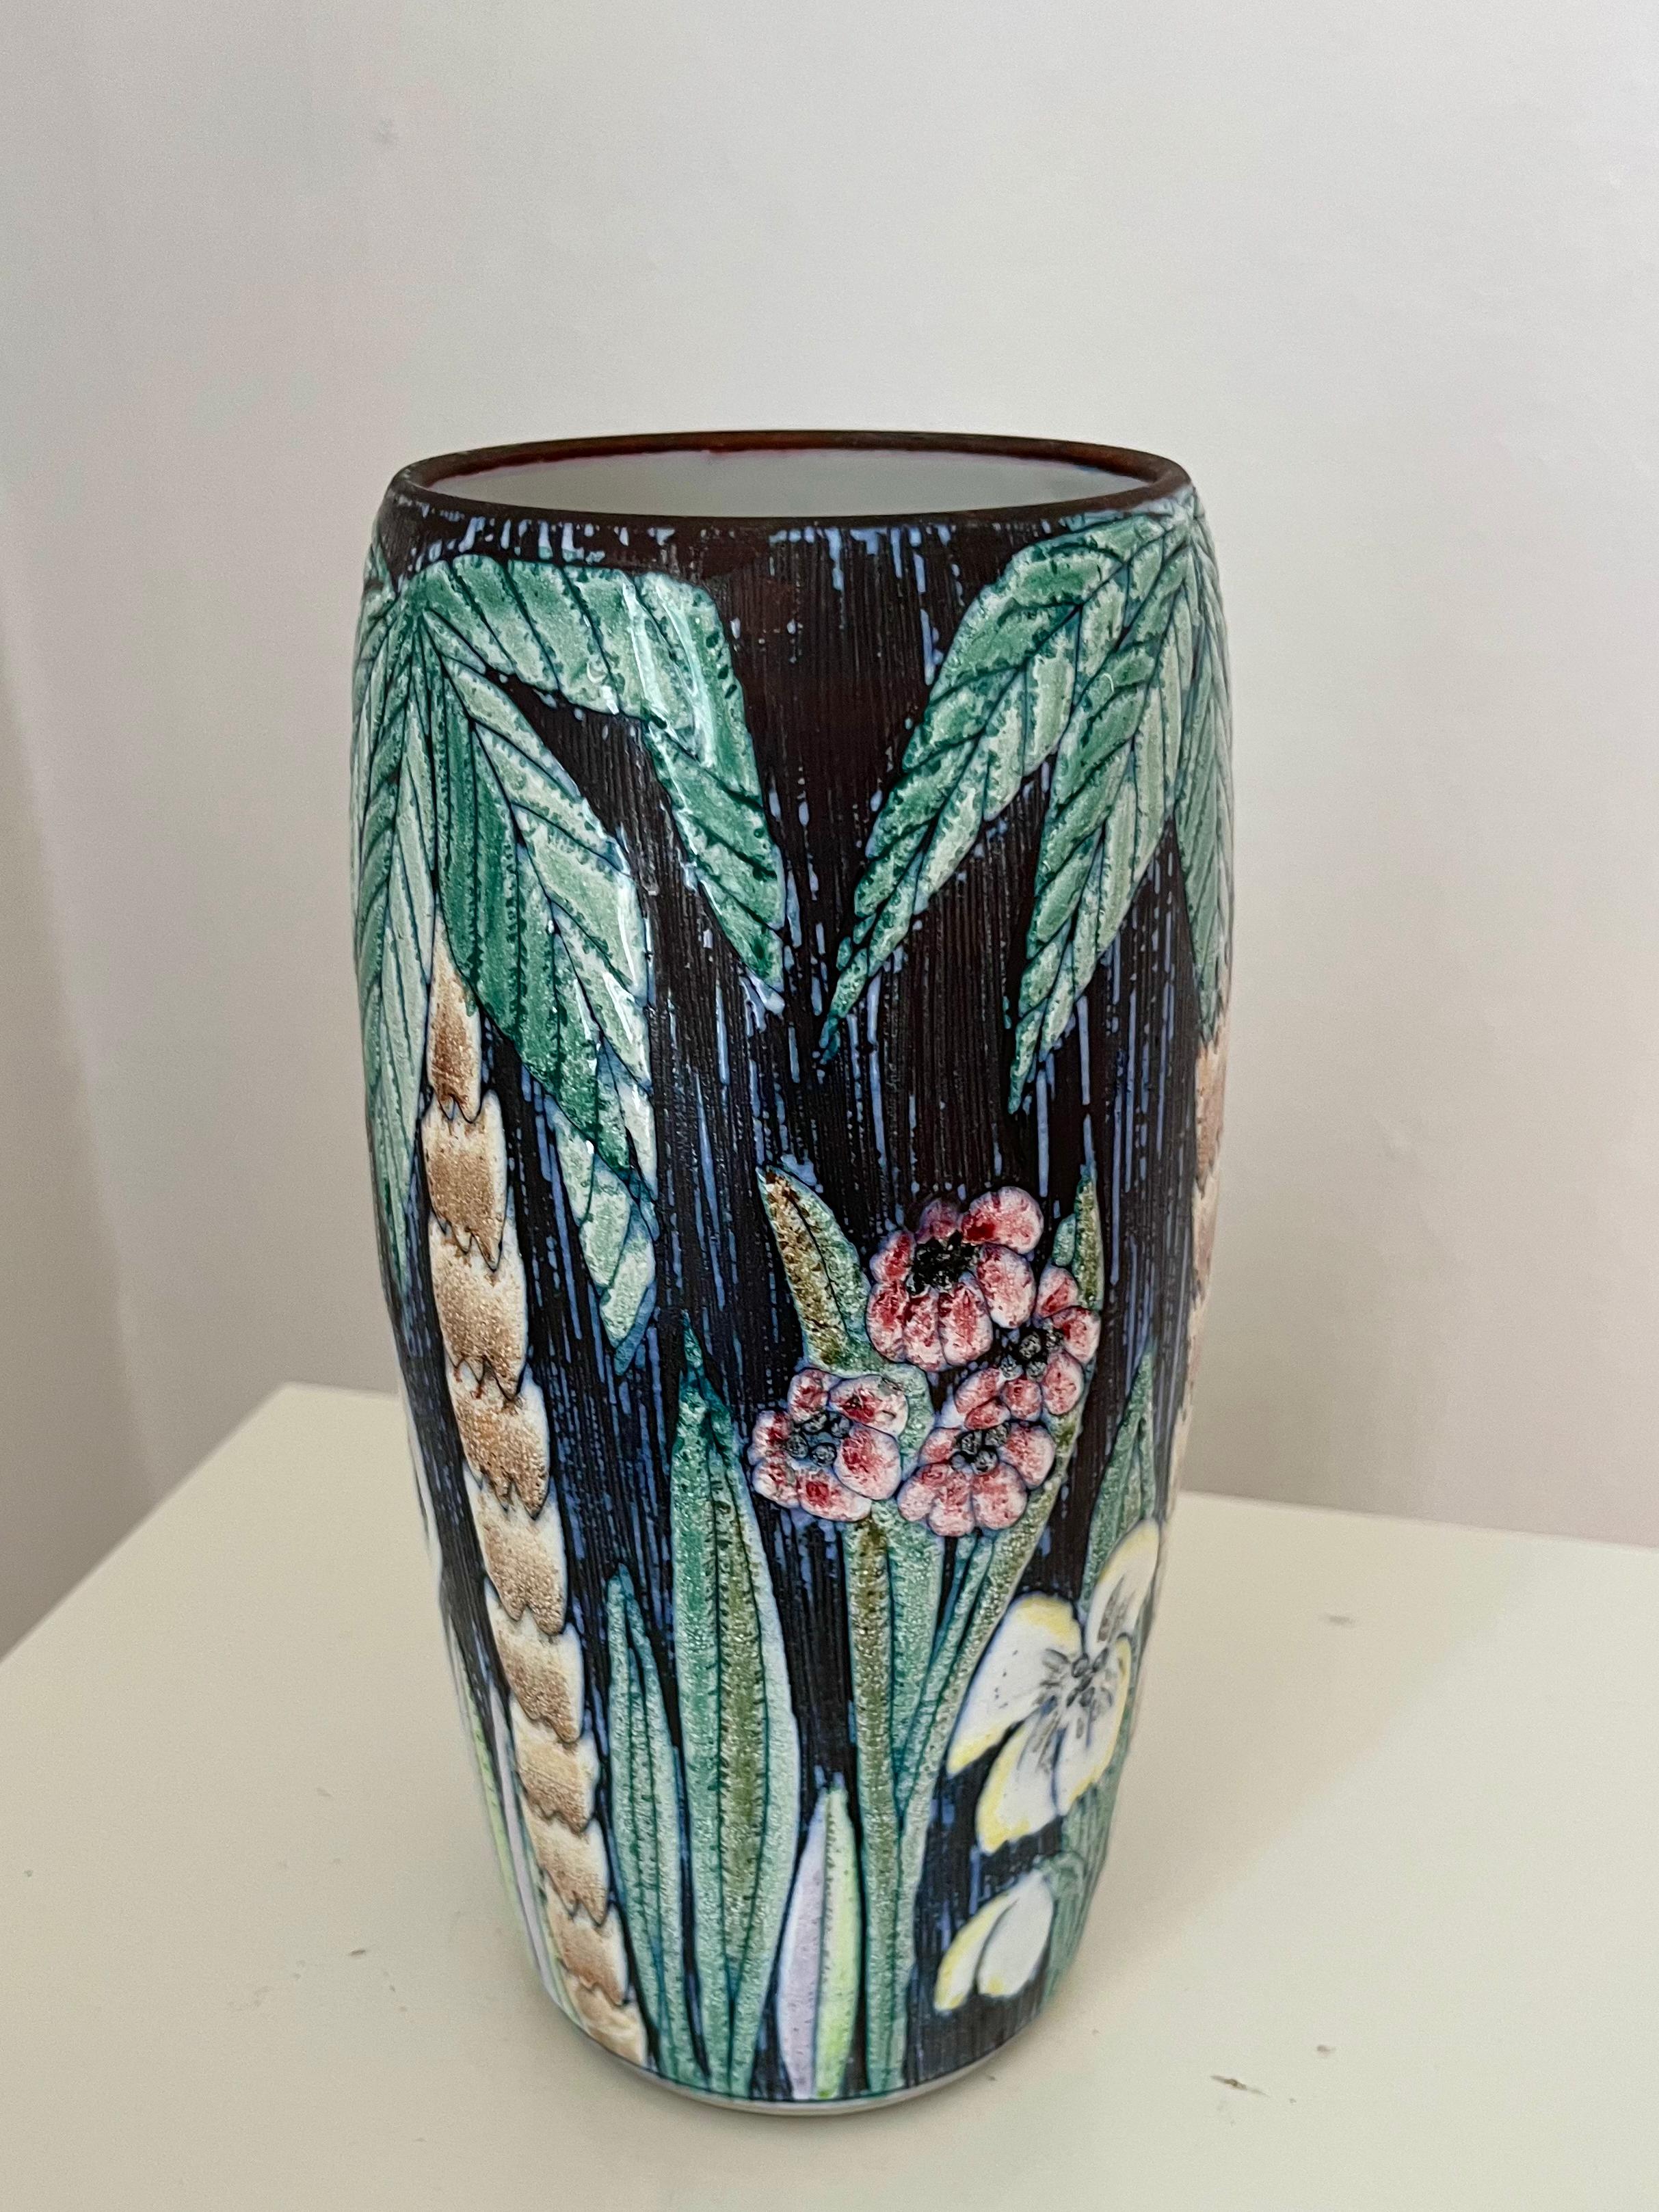 1960s Swedish hand decorated vase by Alingsås Ceramic with palm, flowers & women In Good Condition For Sale In Frederiksberg C, DK